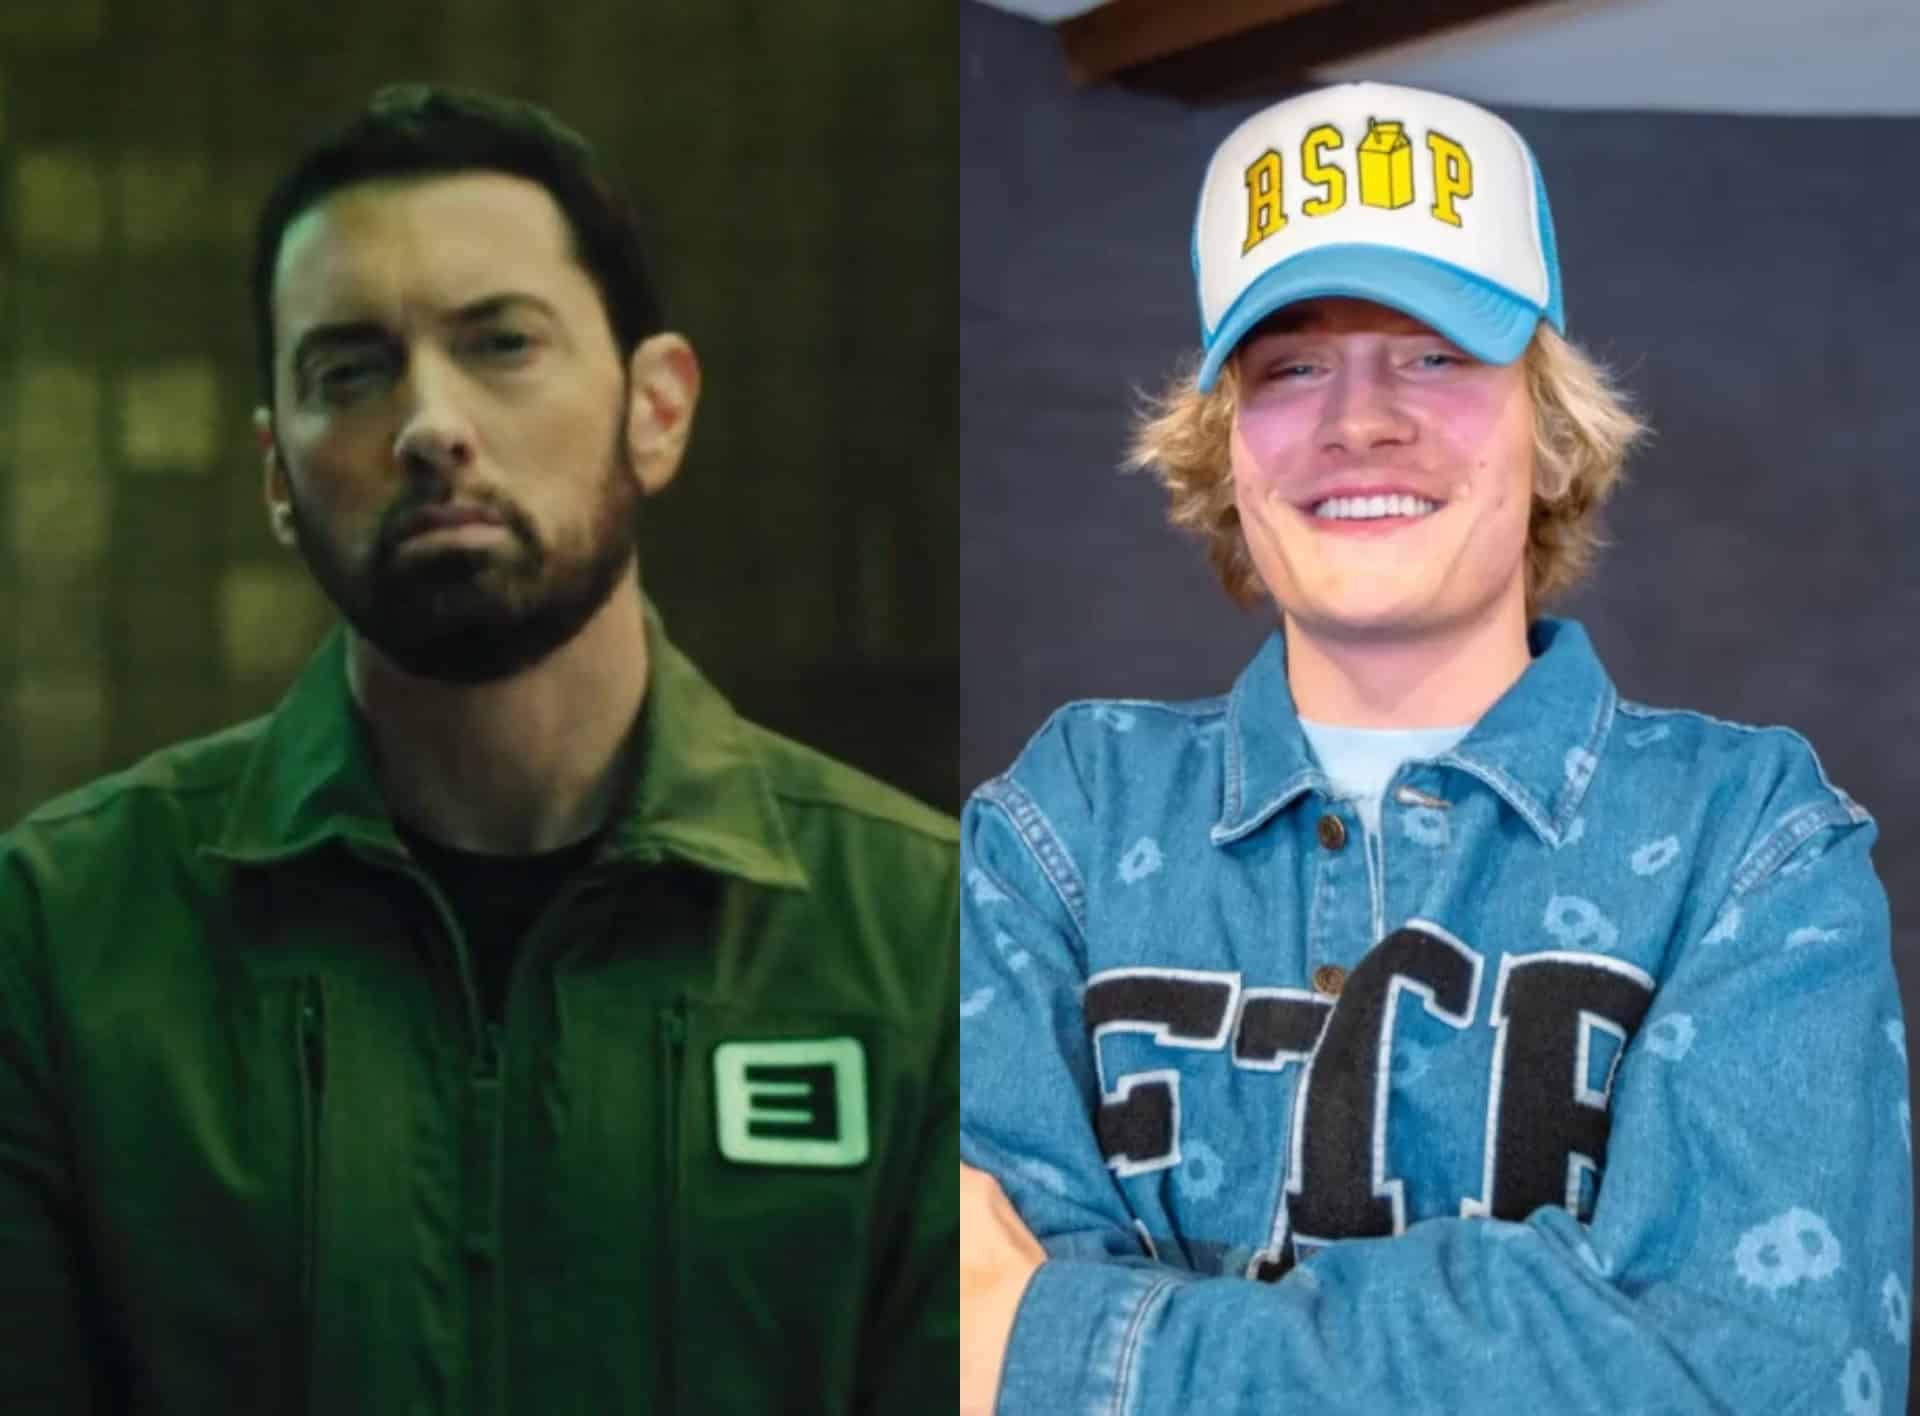 Cole Bennett Reflect On Directing Eminem's Tobey Music Video Lot of Intense Planning, Patience & Persistence